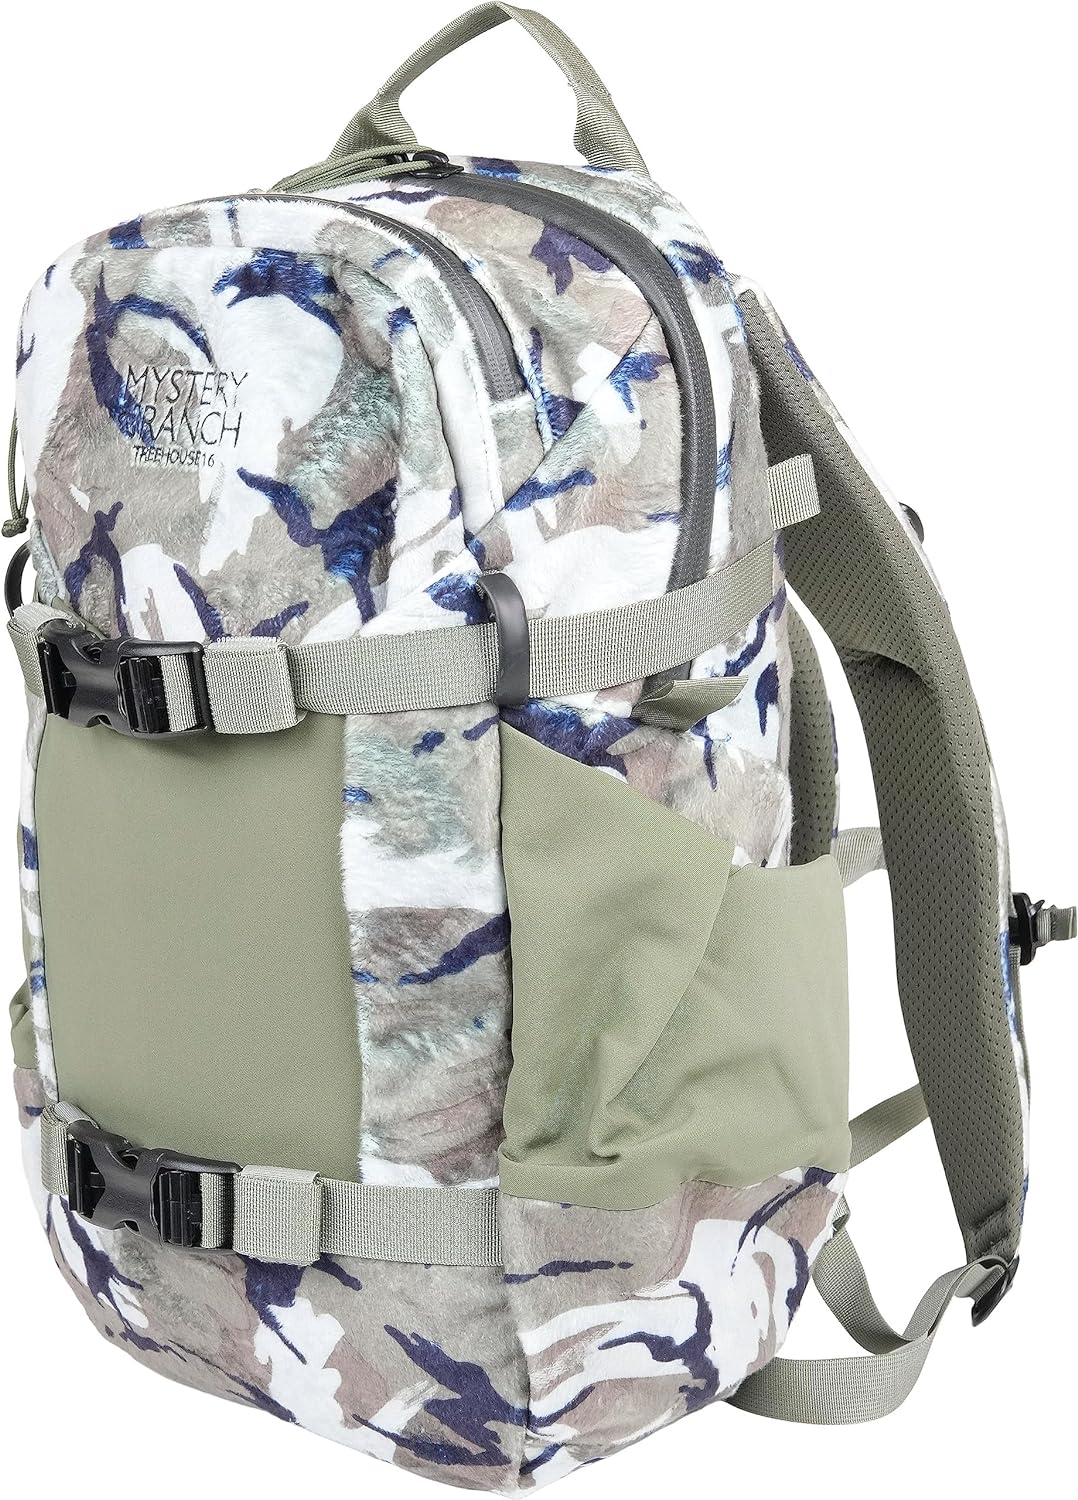 Mystery Ranch Unisex Treehouse 16 Backpack - DPM Canopy - One Size - Sportandleisure.com